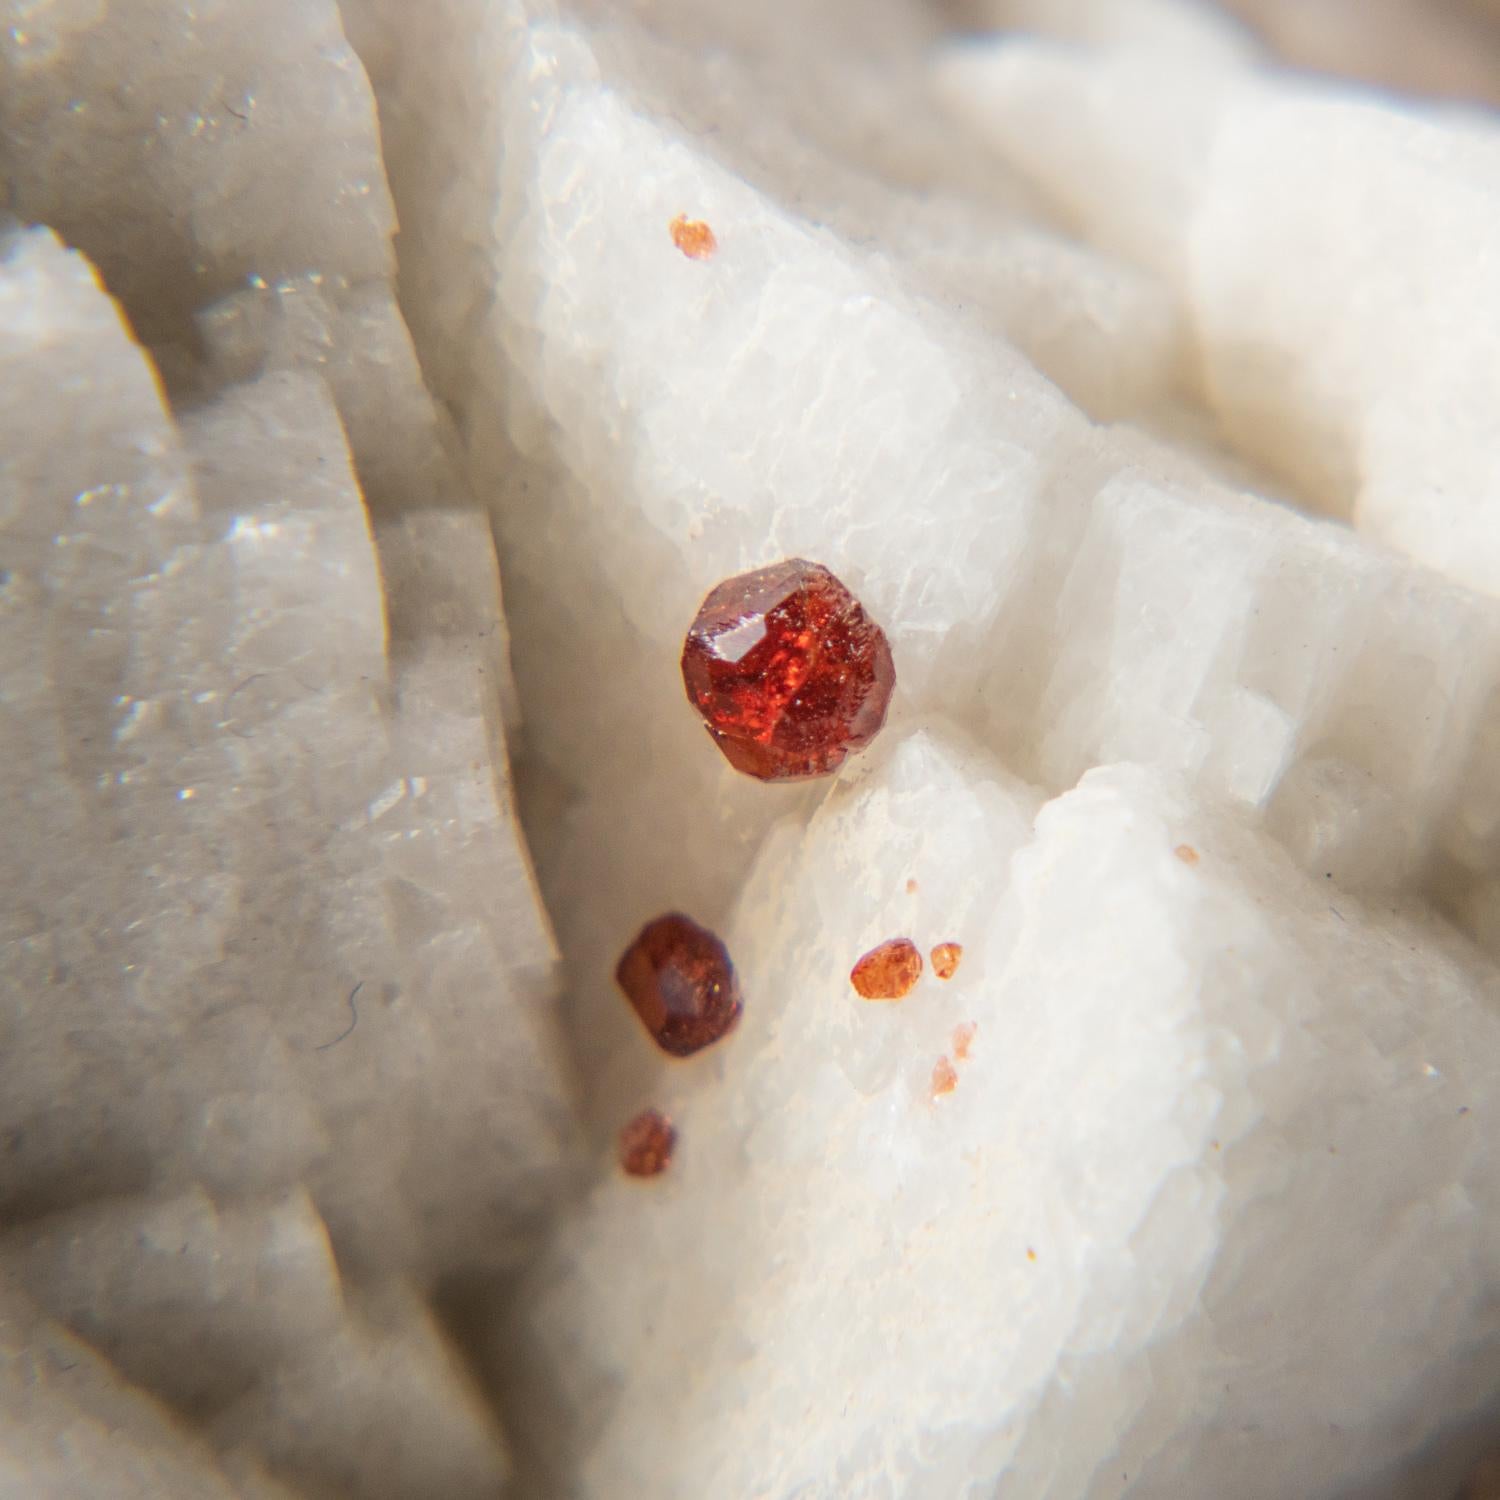 From Tongbei-Yunling District, Fujian Province, China Cluster of transparent lustrous deep red spessartine garnet cluster on microline matrix with bladed muscovite crystals. These beautiful minerals can provide a stunning display piece, as well as a